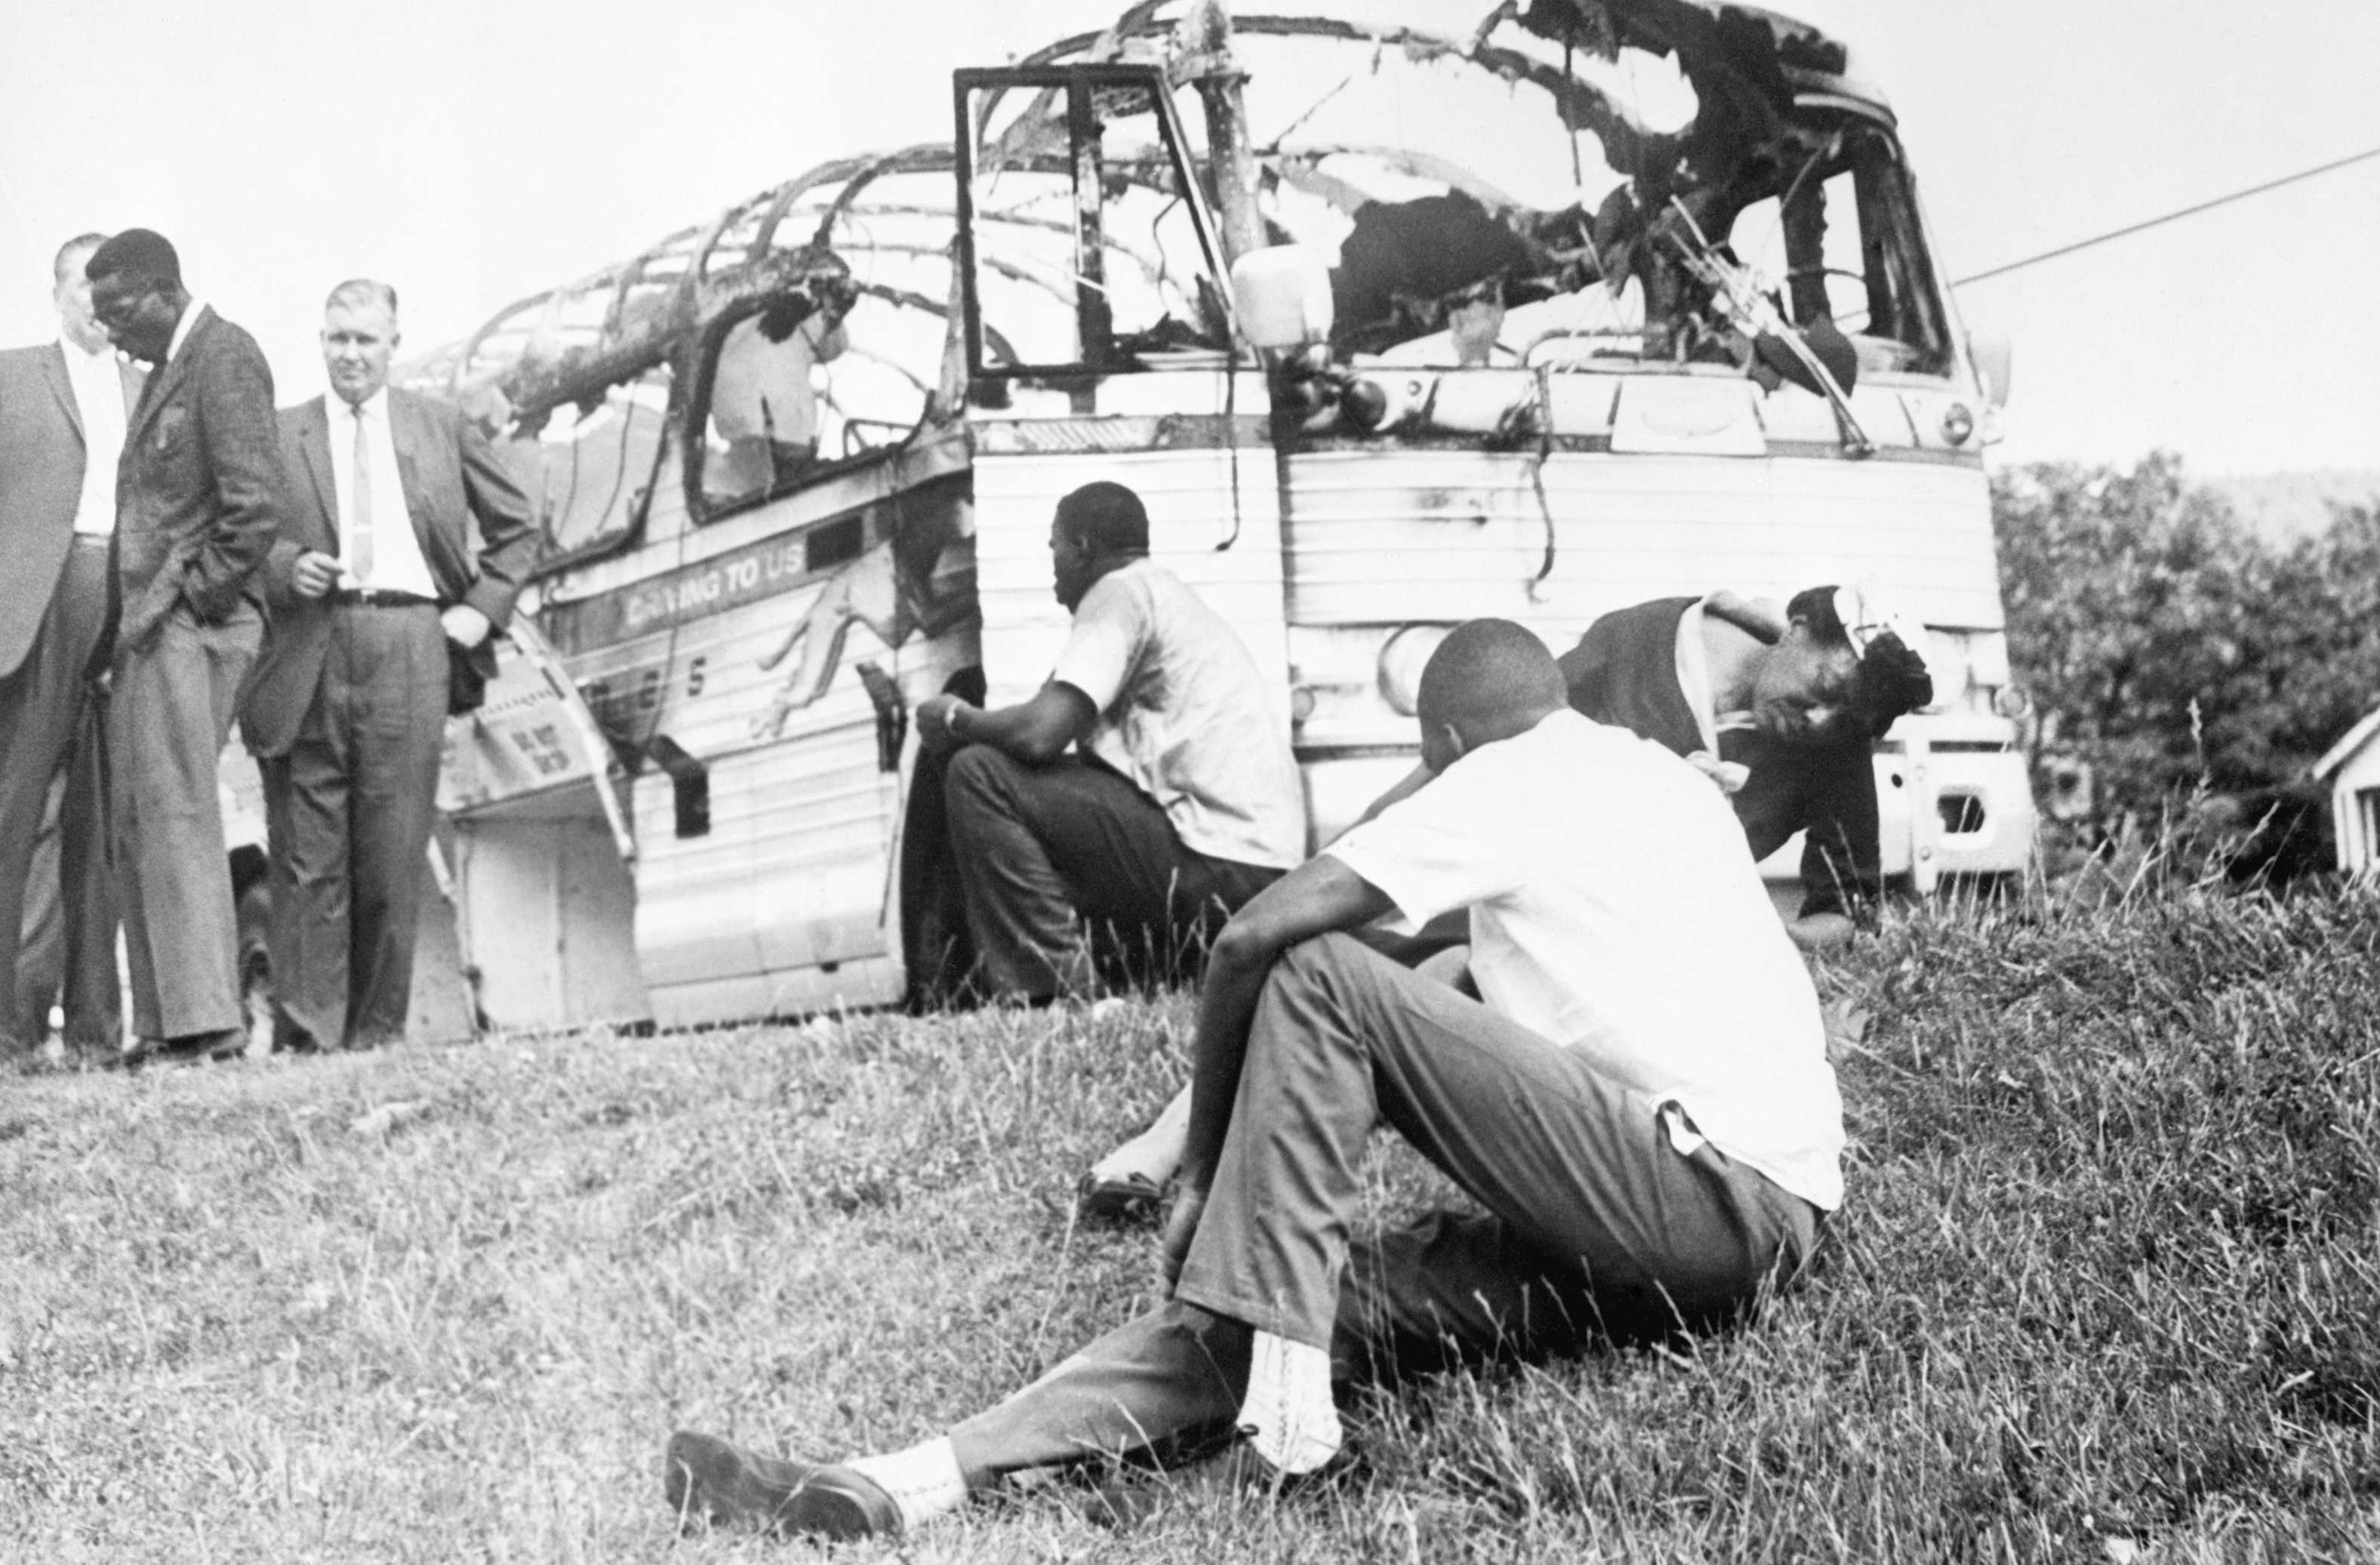 Black and White Photograh of men standing and sitting near burned out bus